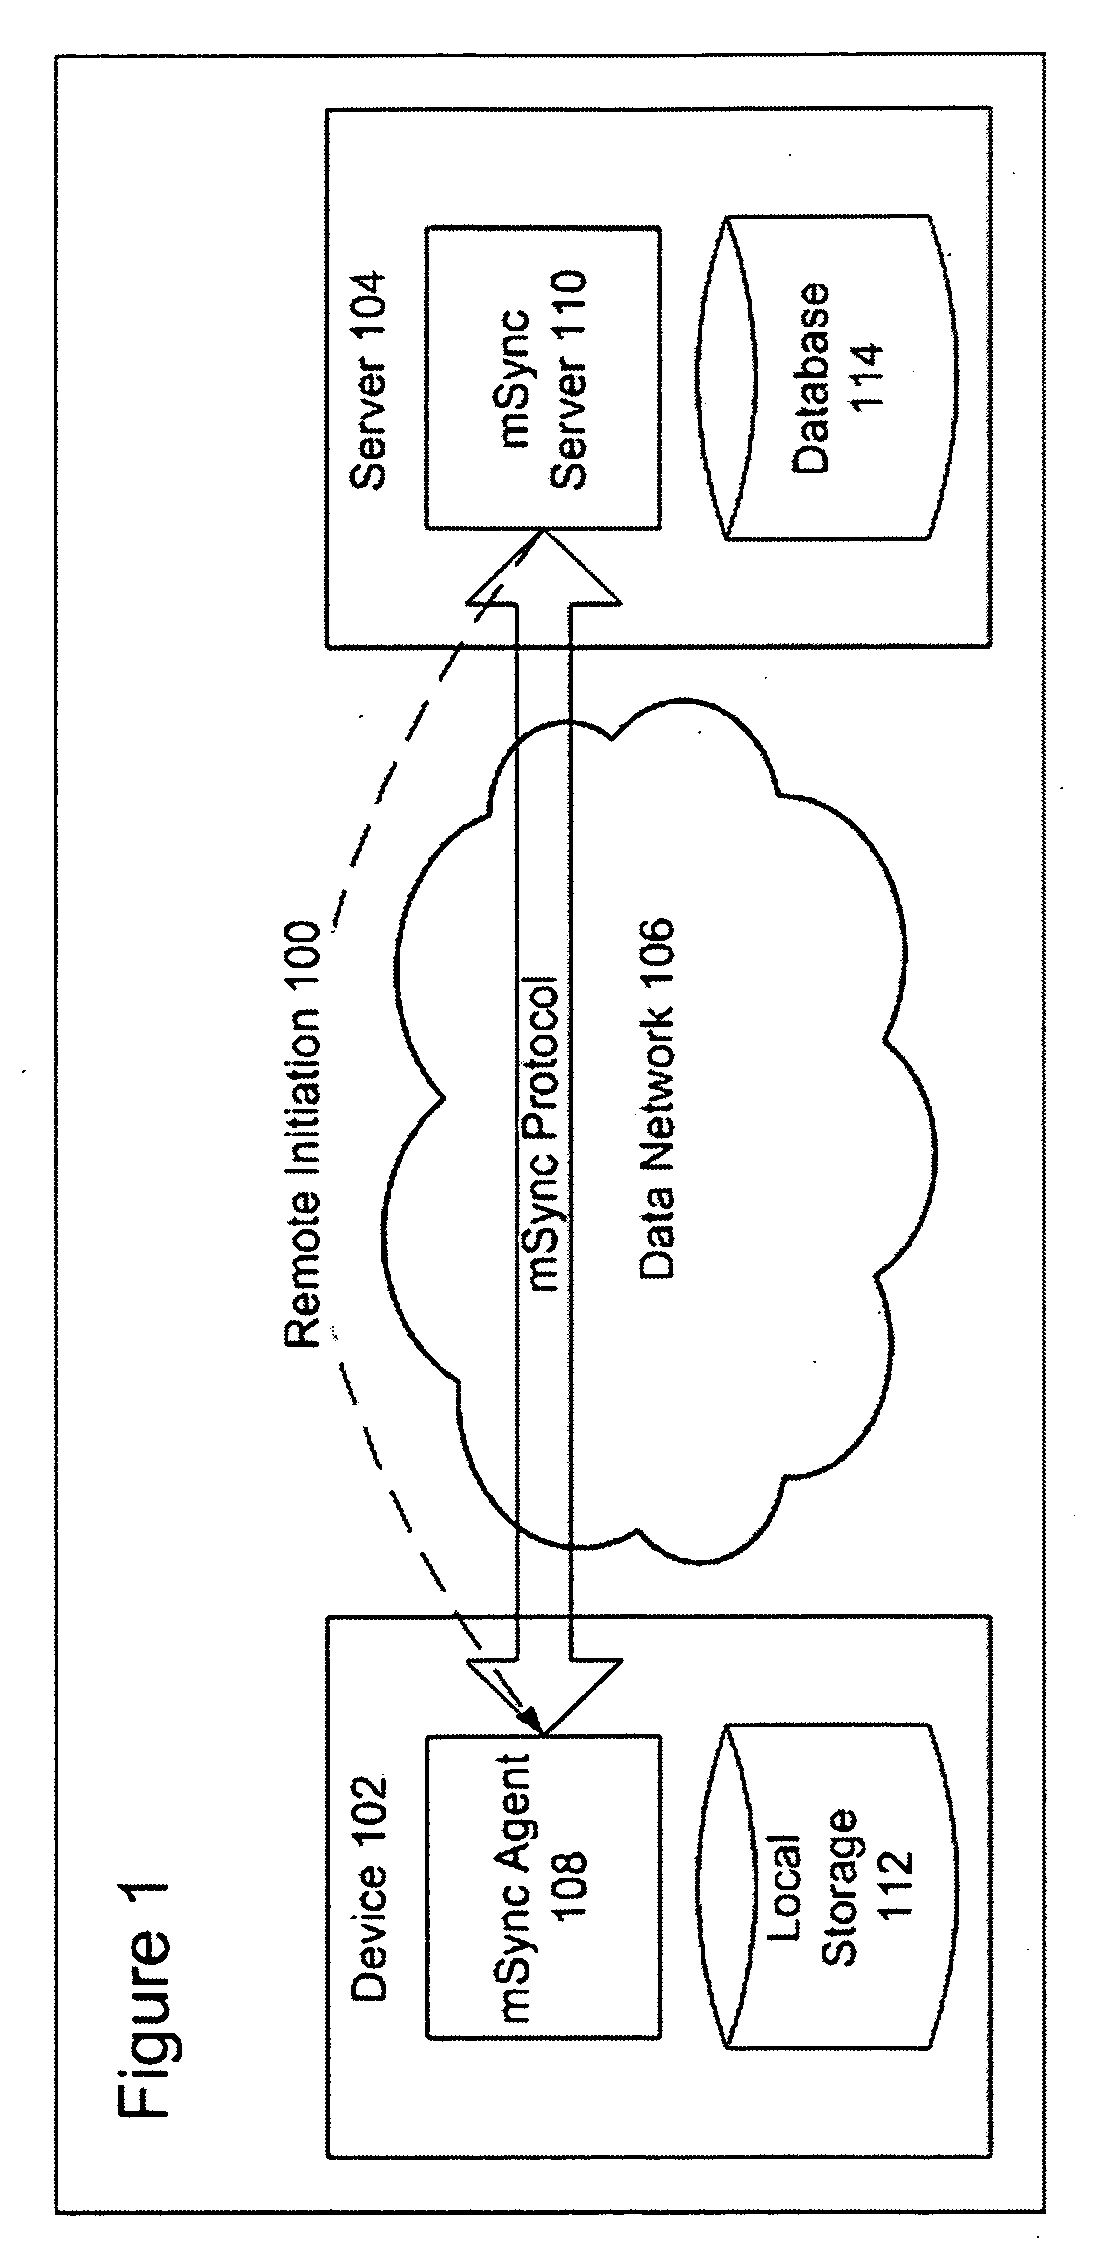 System and method for client synchronization for a communication device